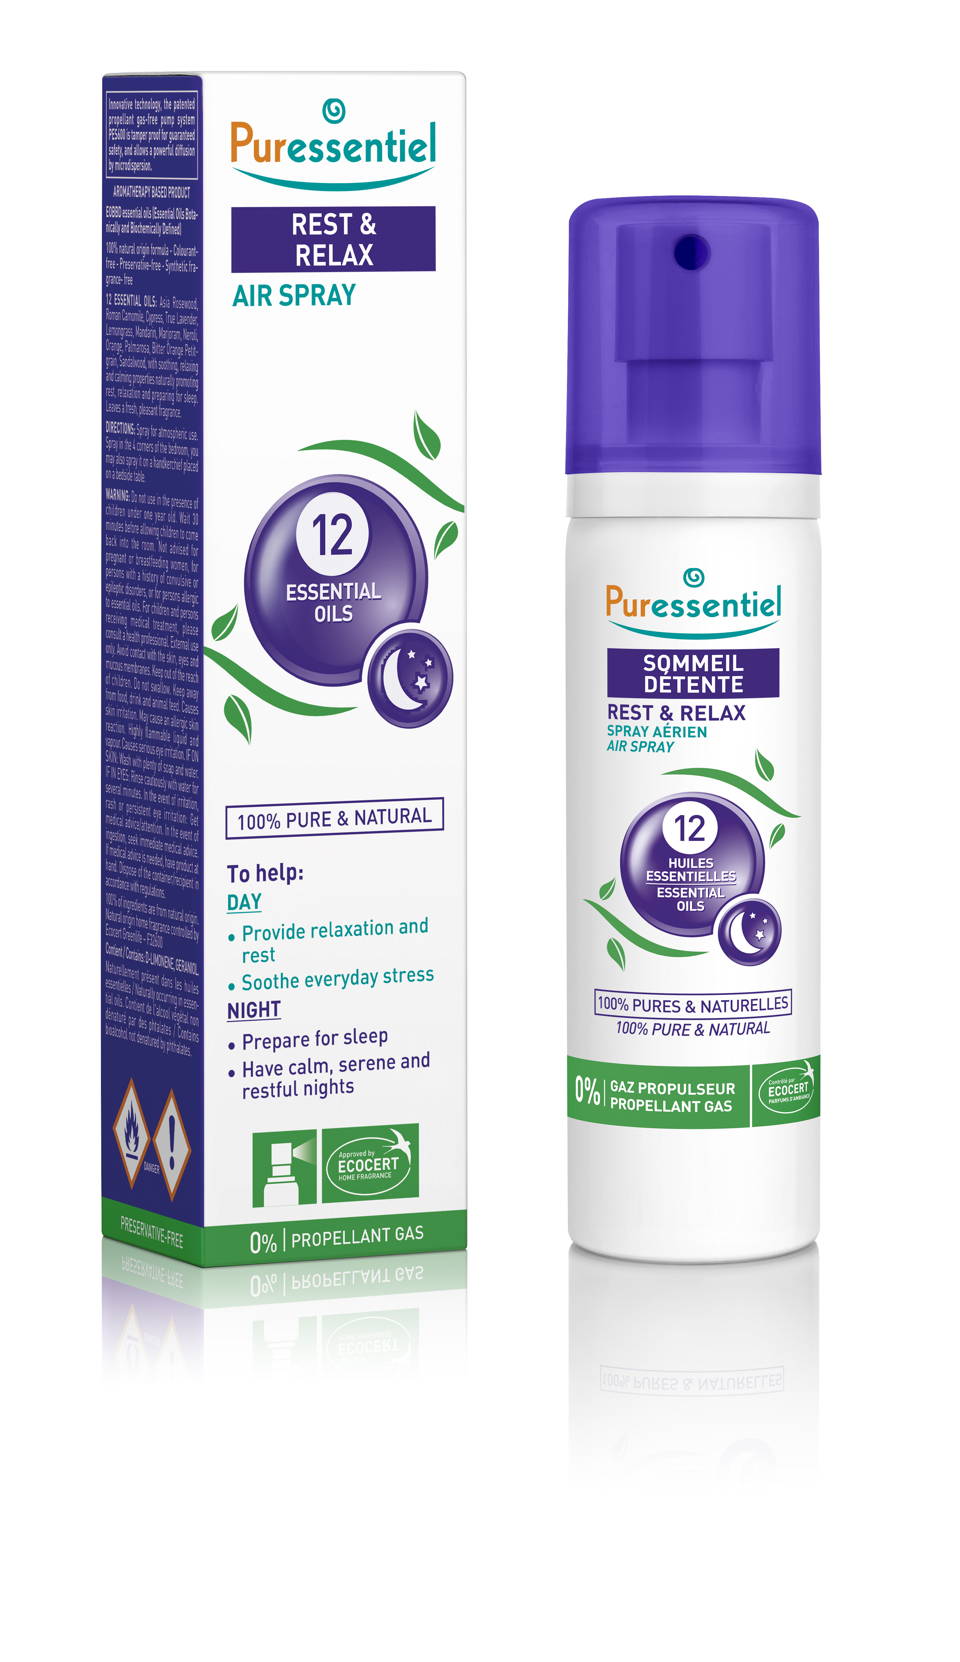 Puressentiel Respiratory Spray makes it to the Best Selling new products in India